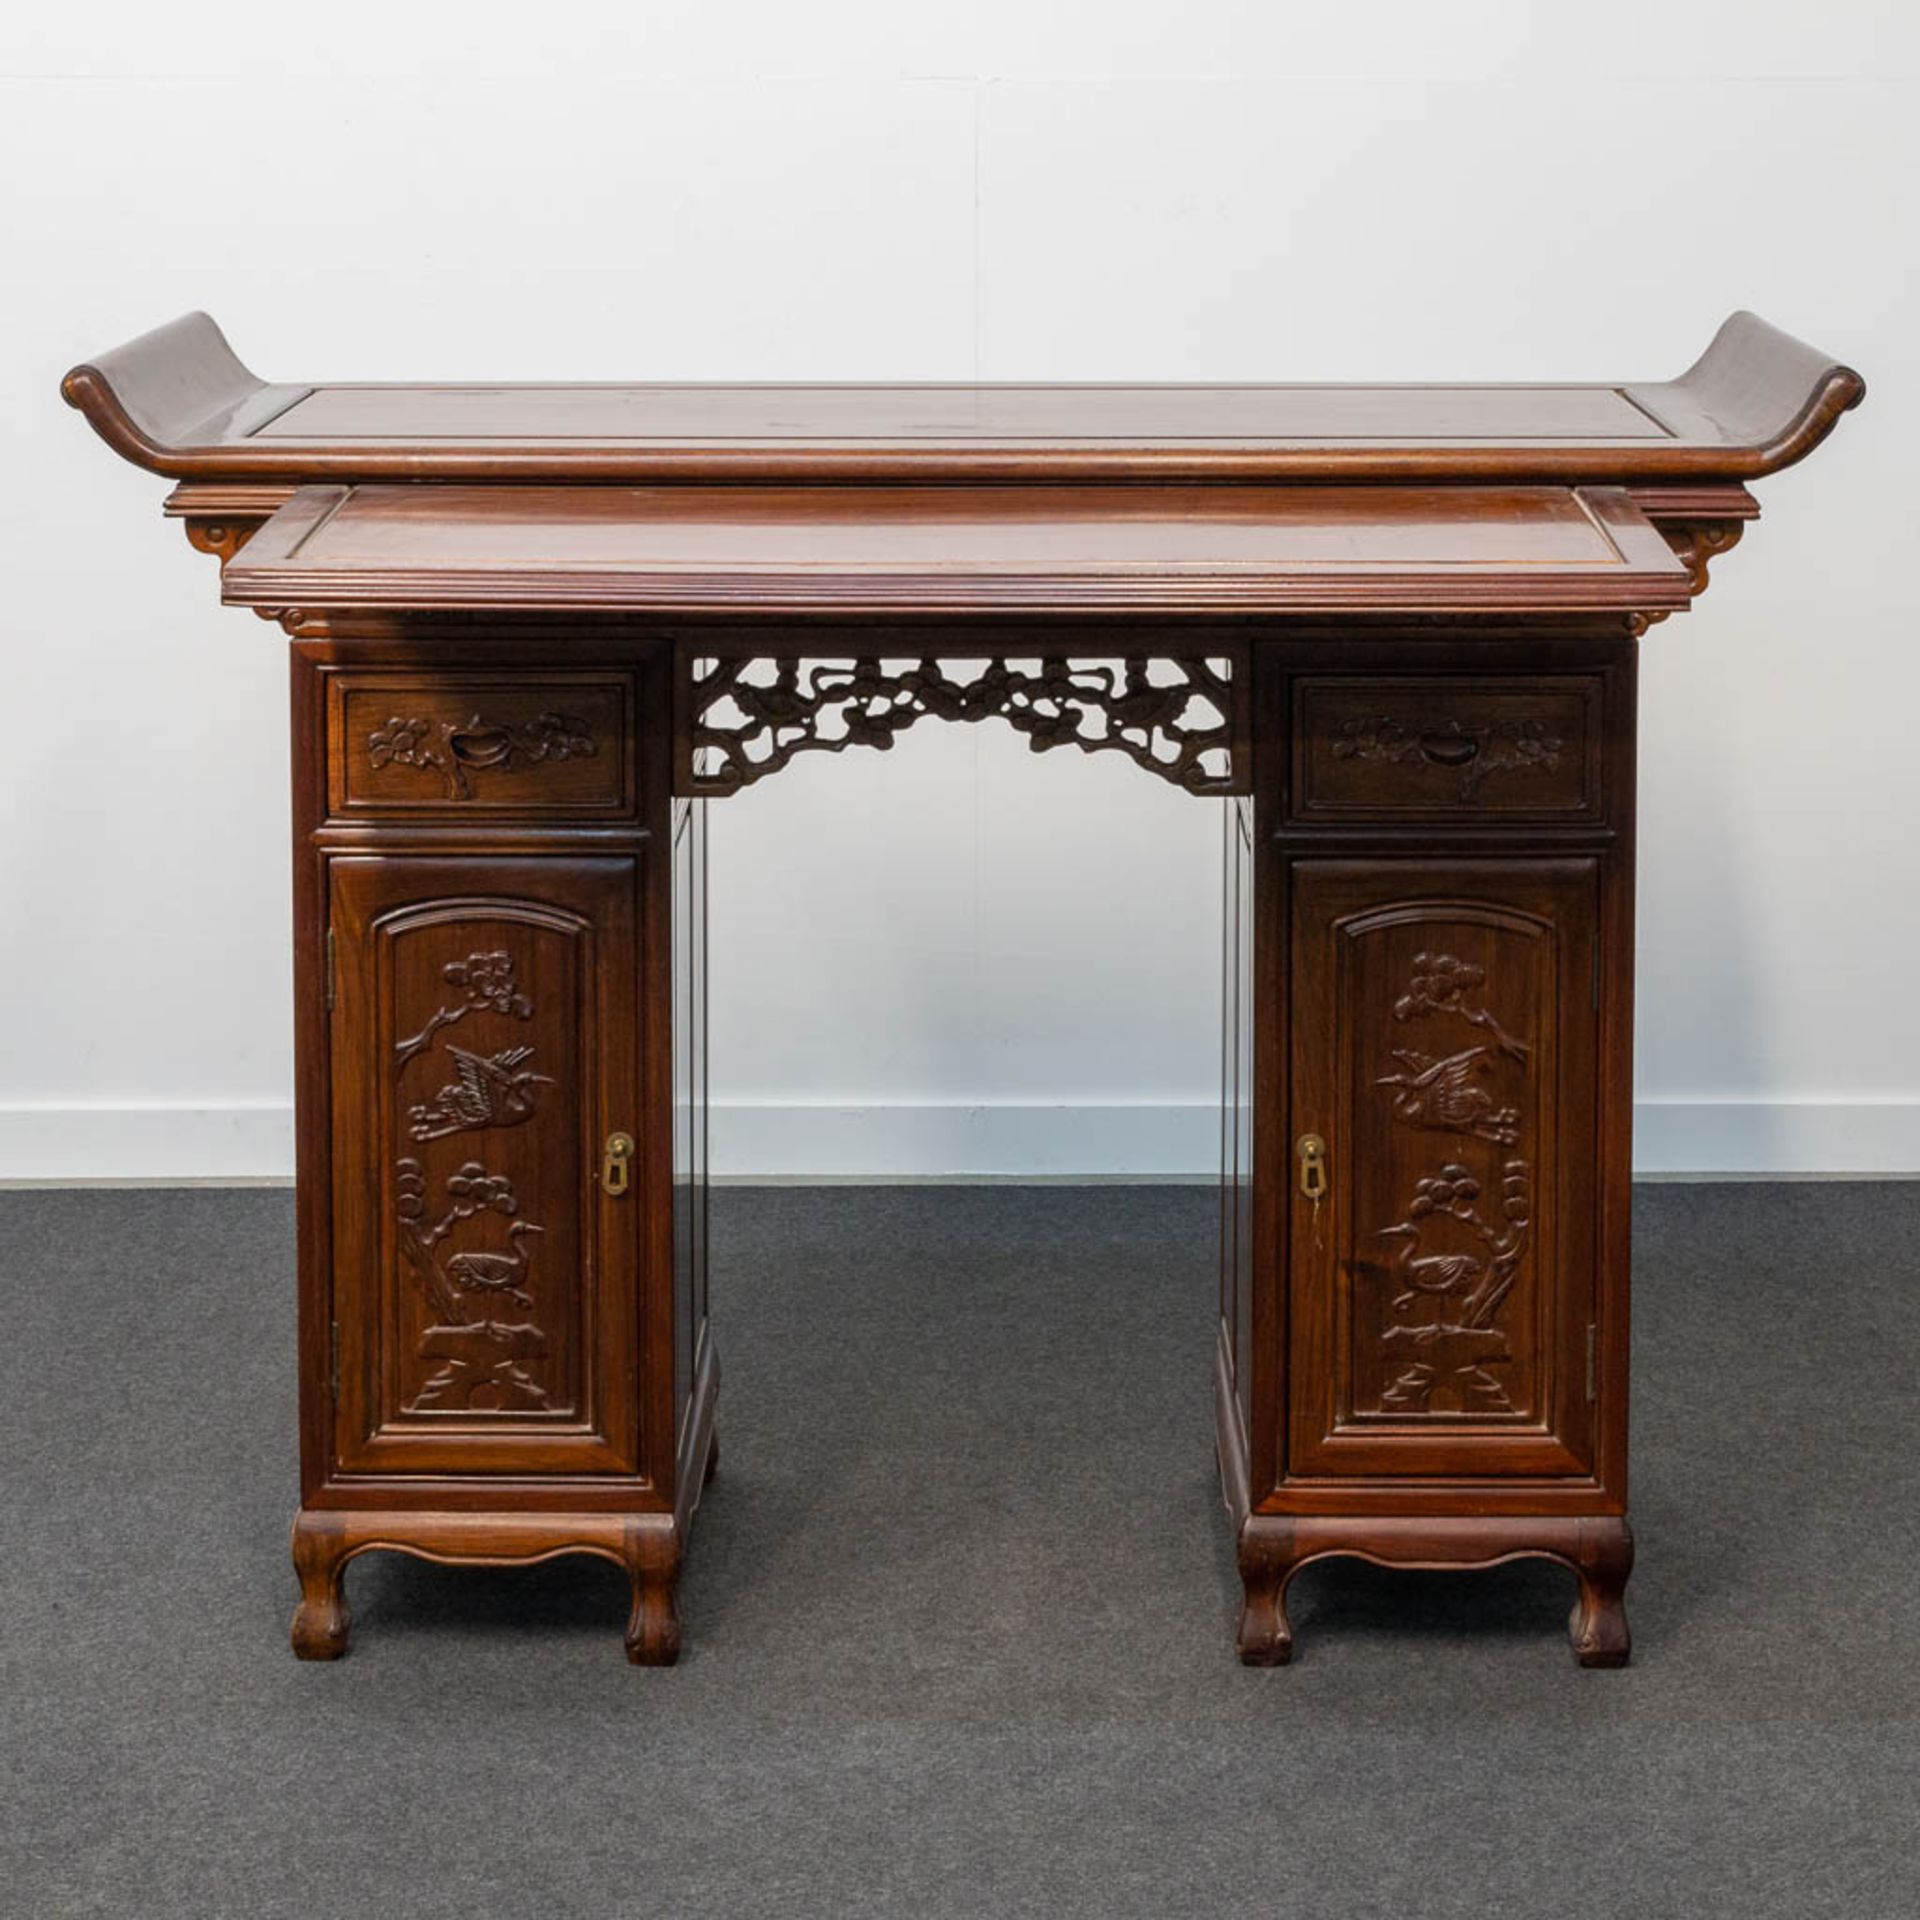 A Chinese hardwood Scroll Desk - Image 11 of 23